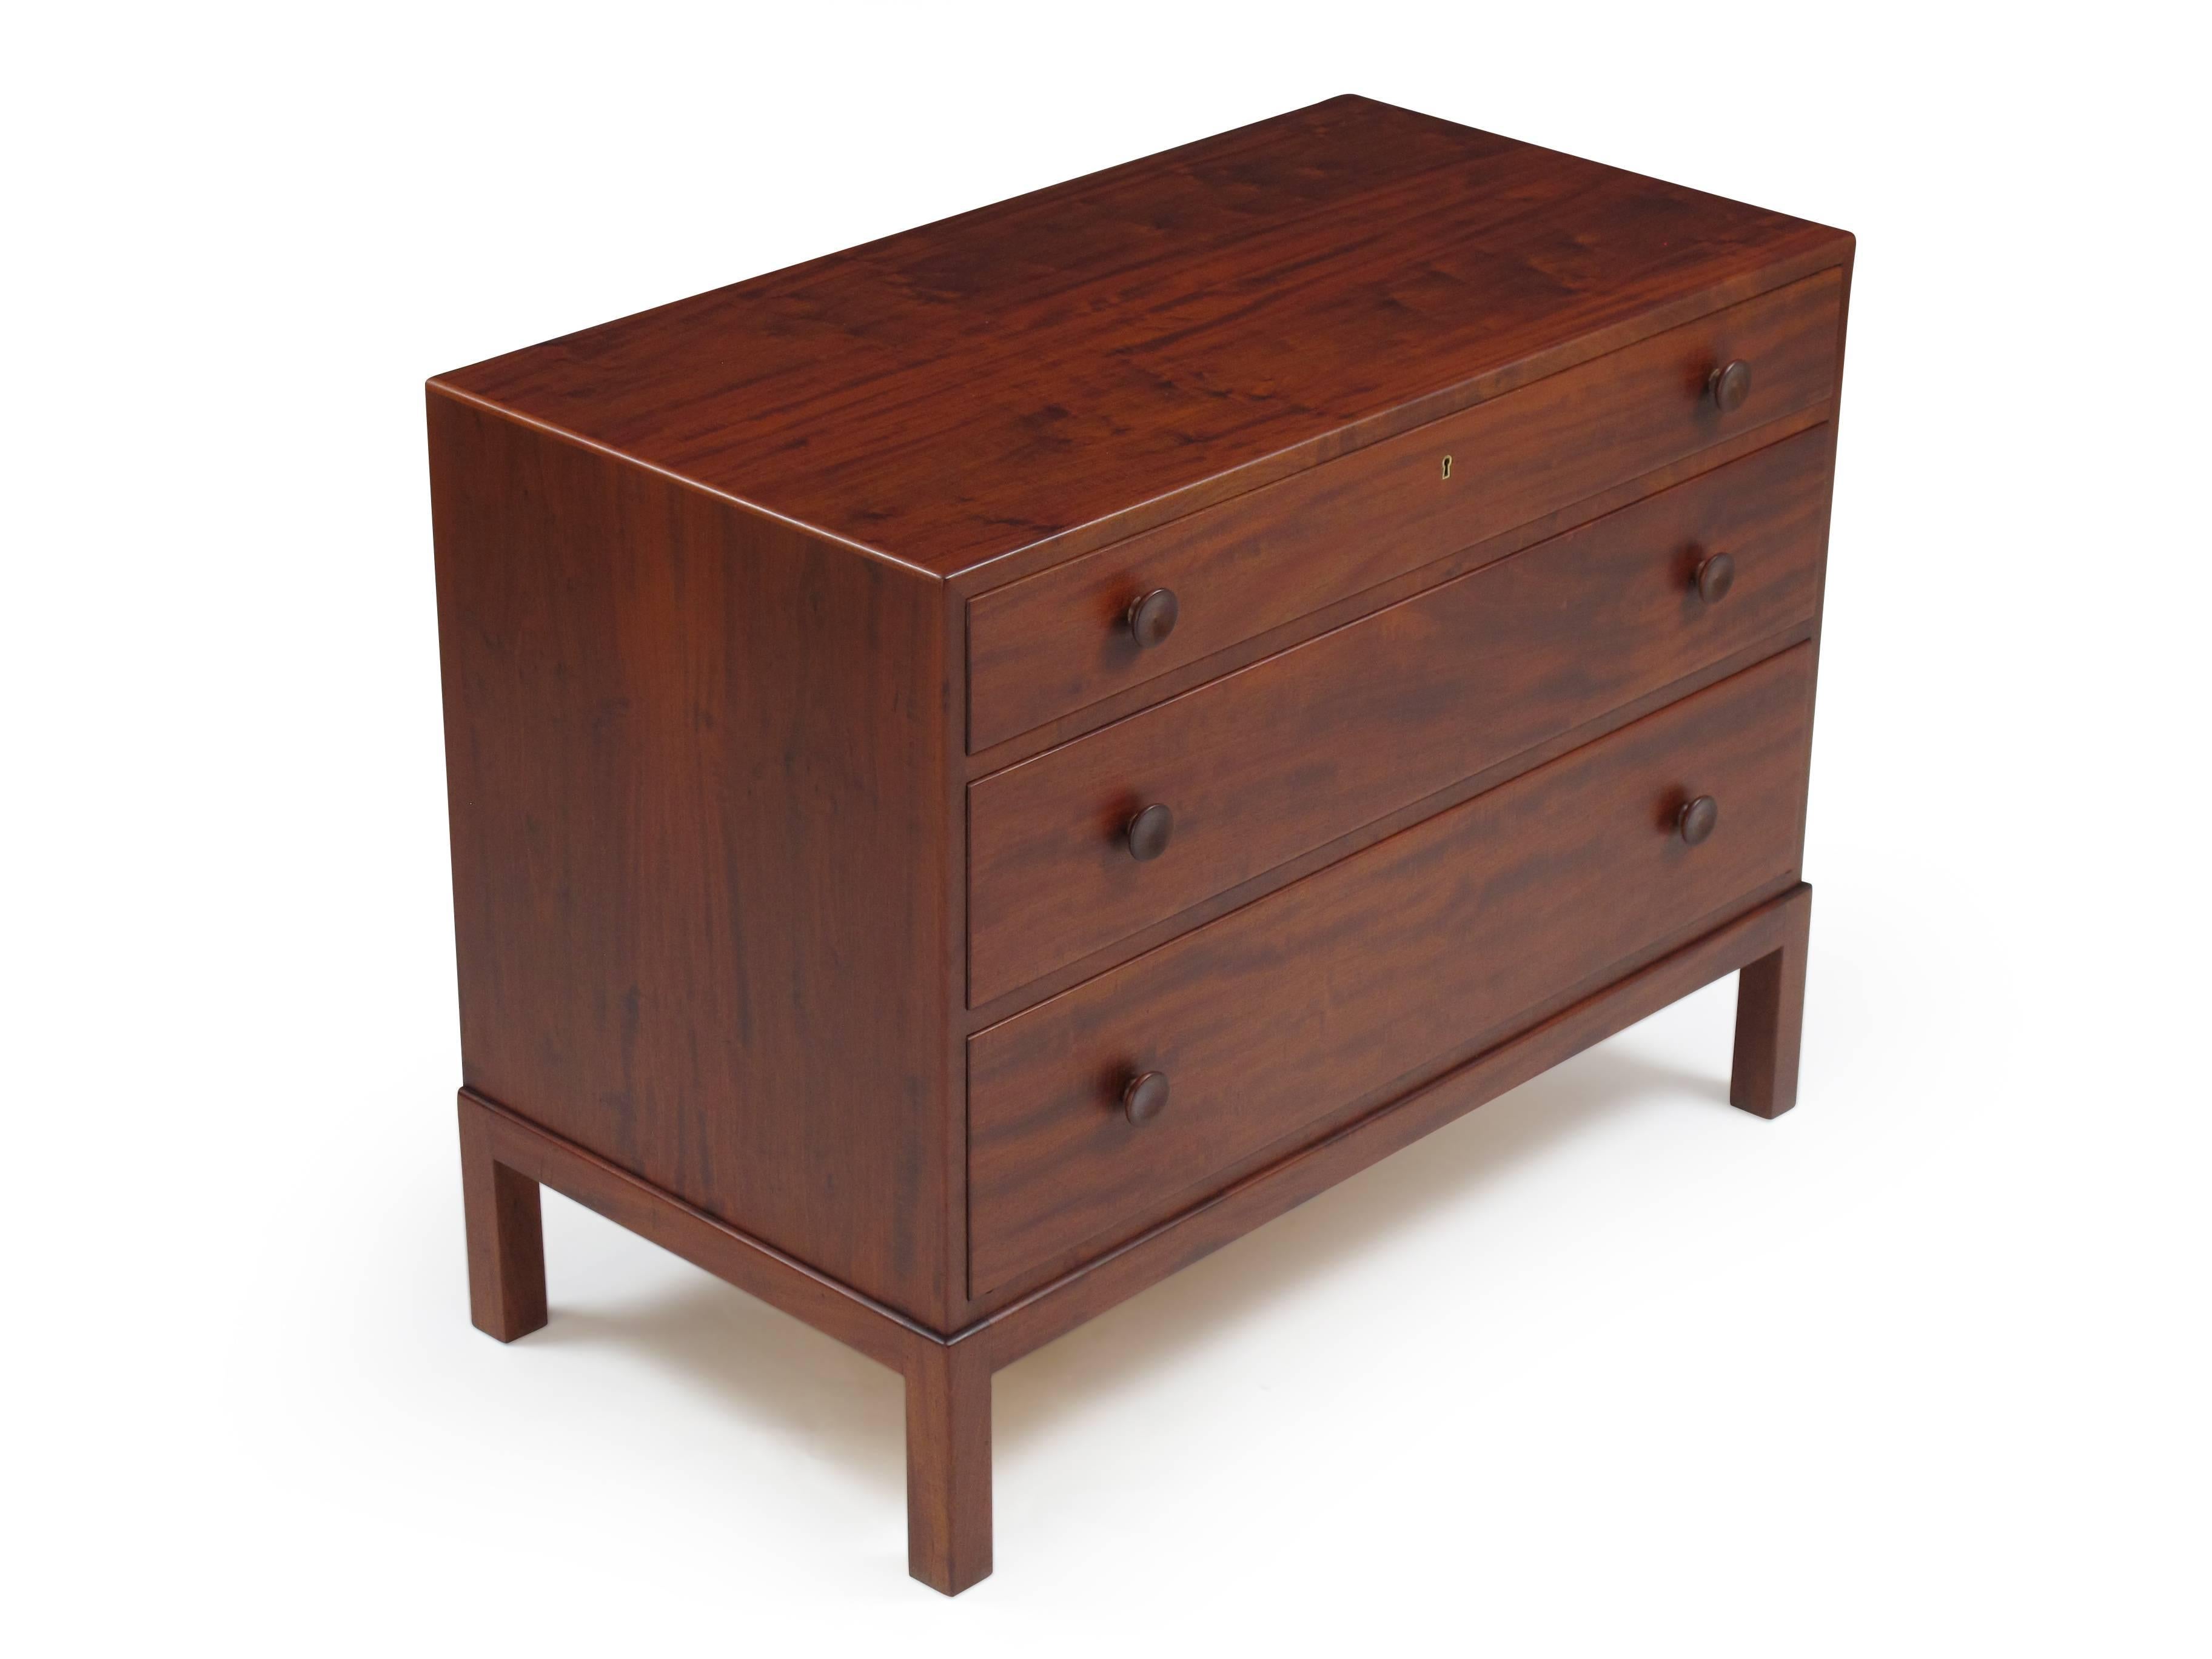 1930s, Scandinavian dresser finely crafted of solid Cuban mahogany with dove tail joinery.